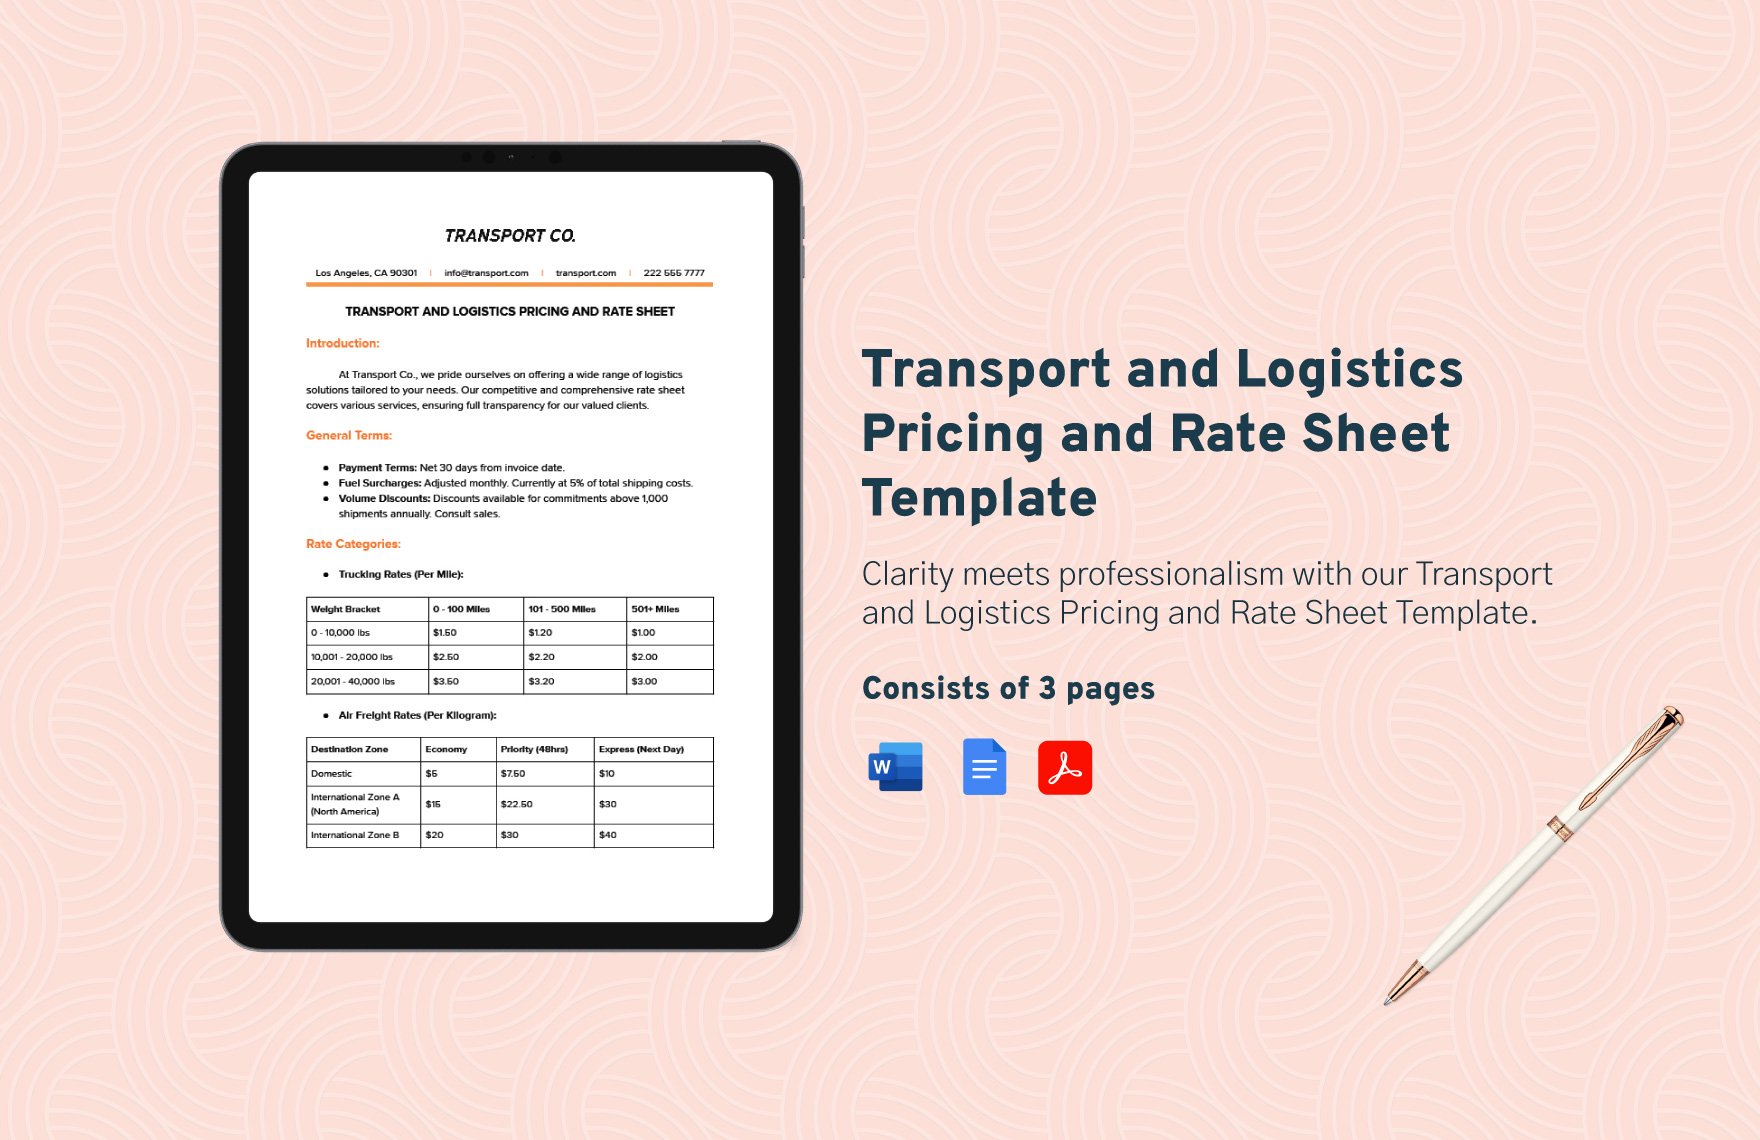 Transport and Logistics Pricing and Rate Sheet Template